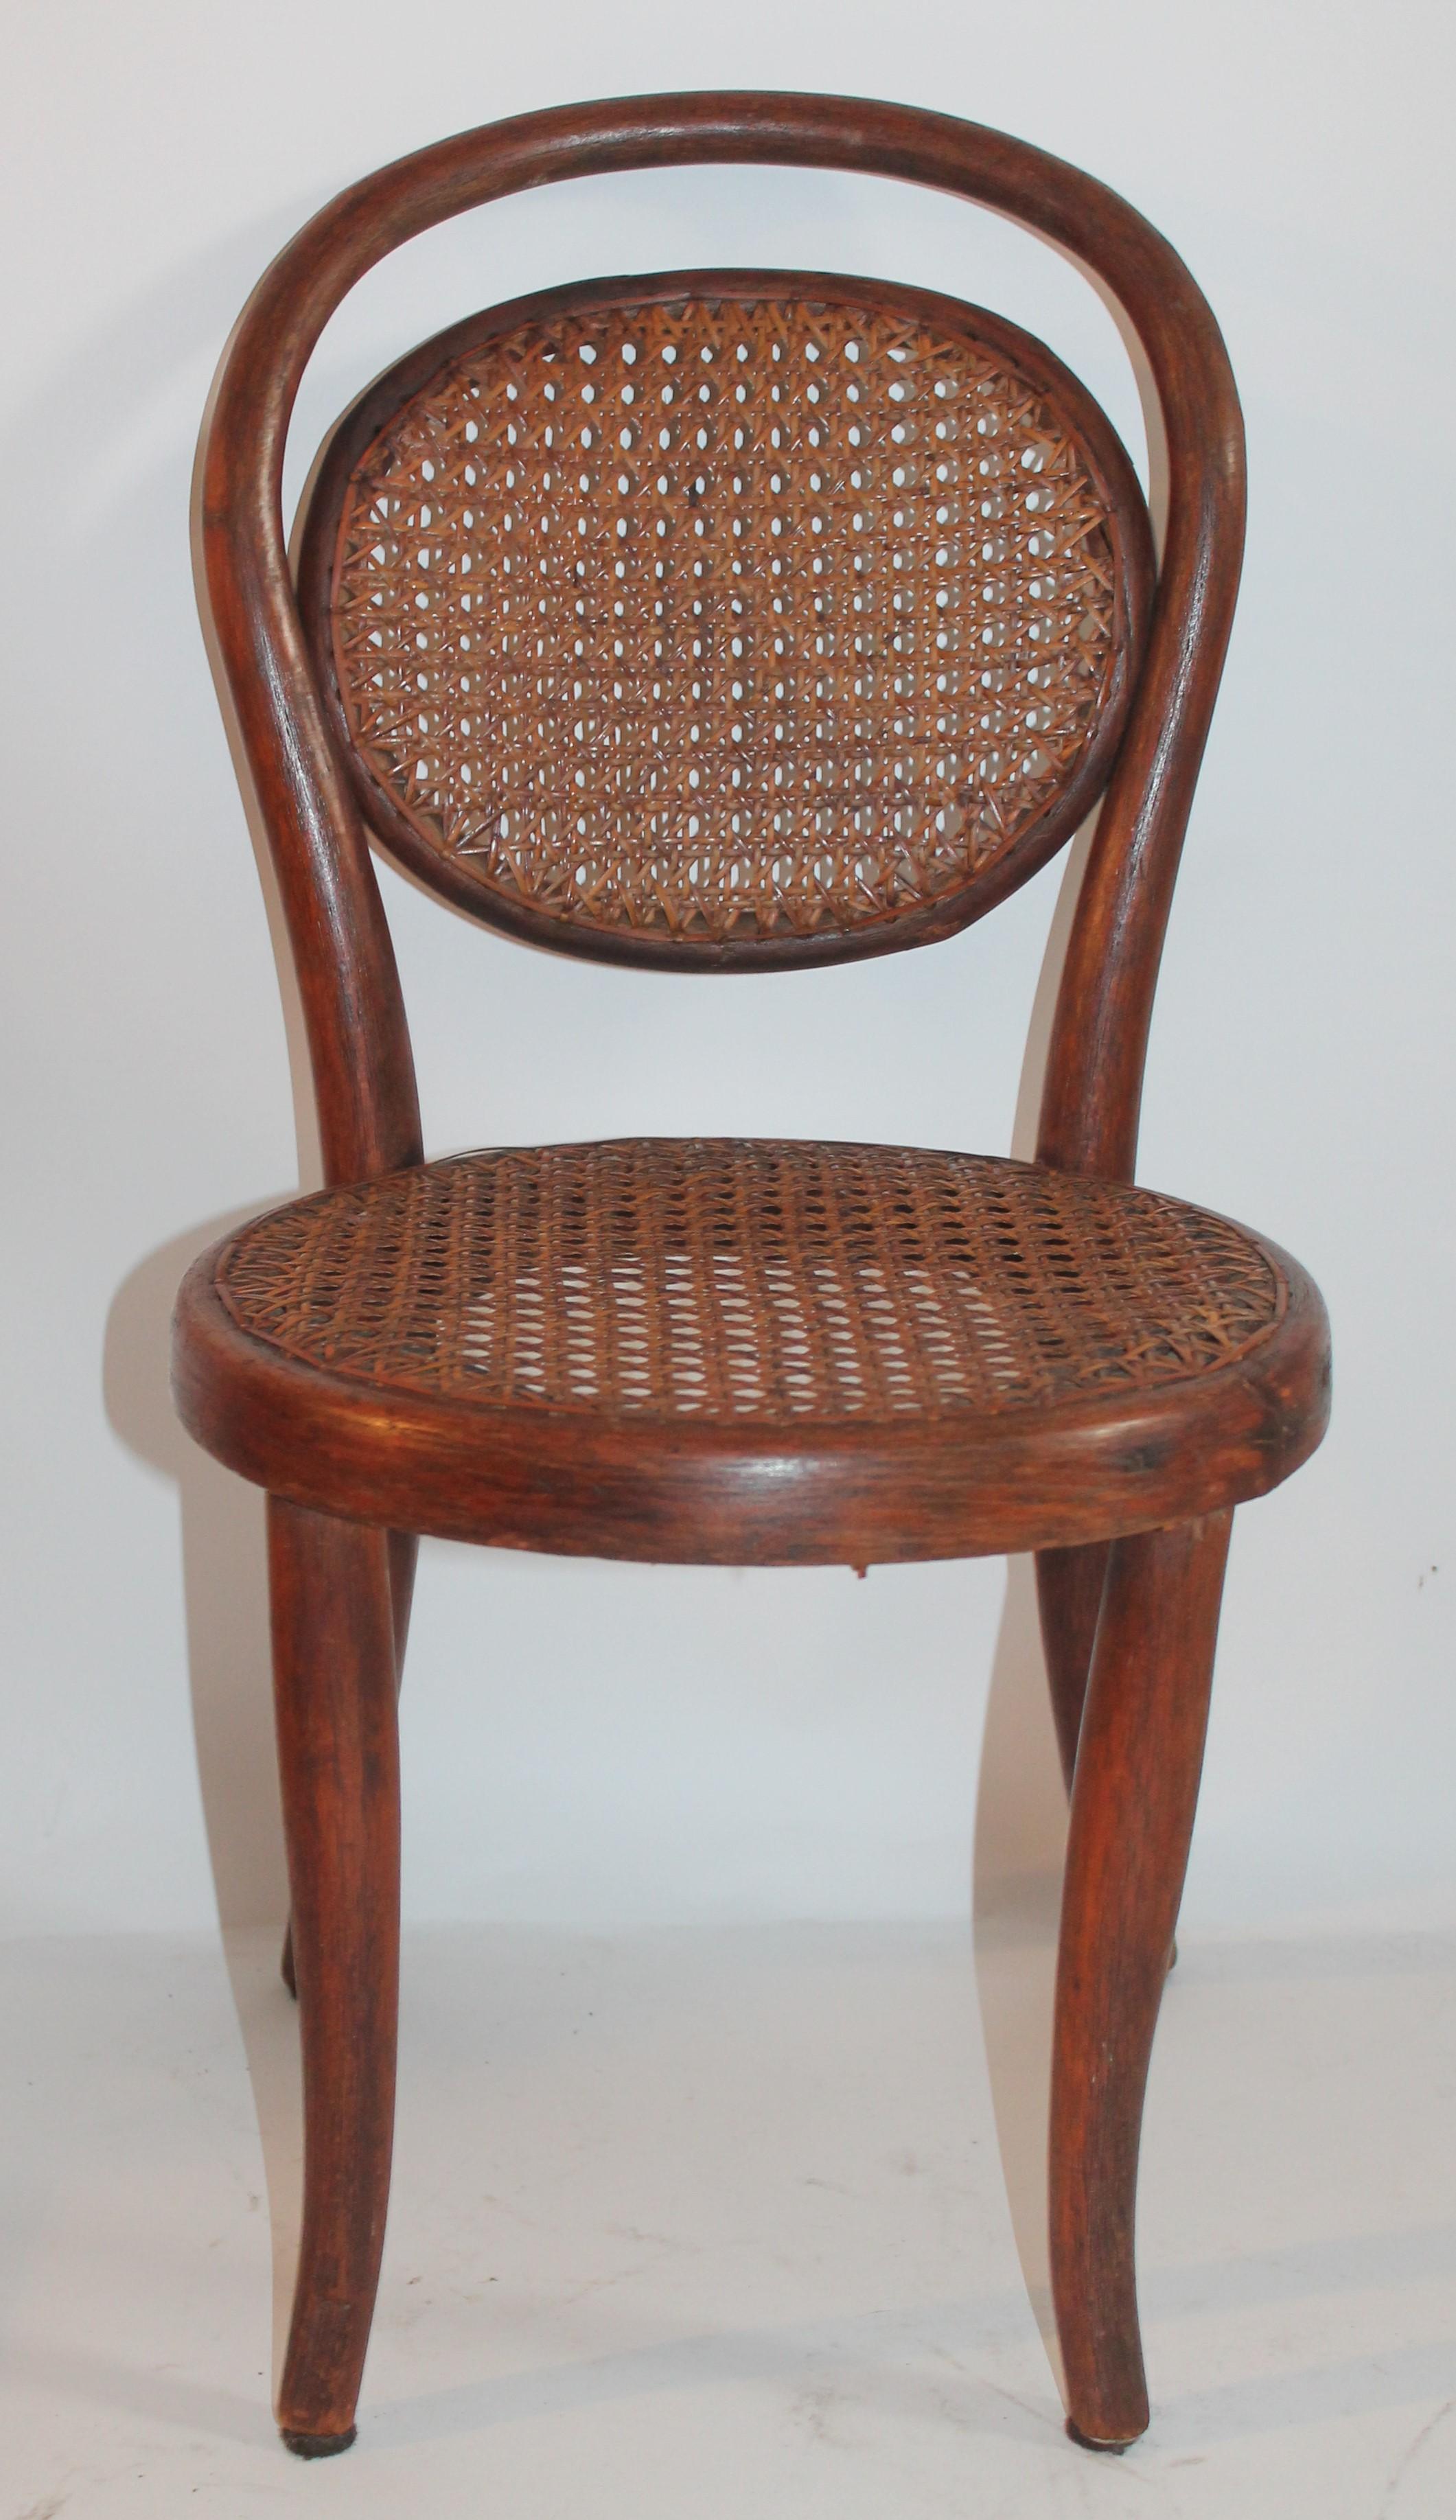 Bentwood Rocker and Chair with Cane Seats, 19th Century For Sale 3